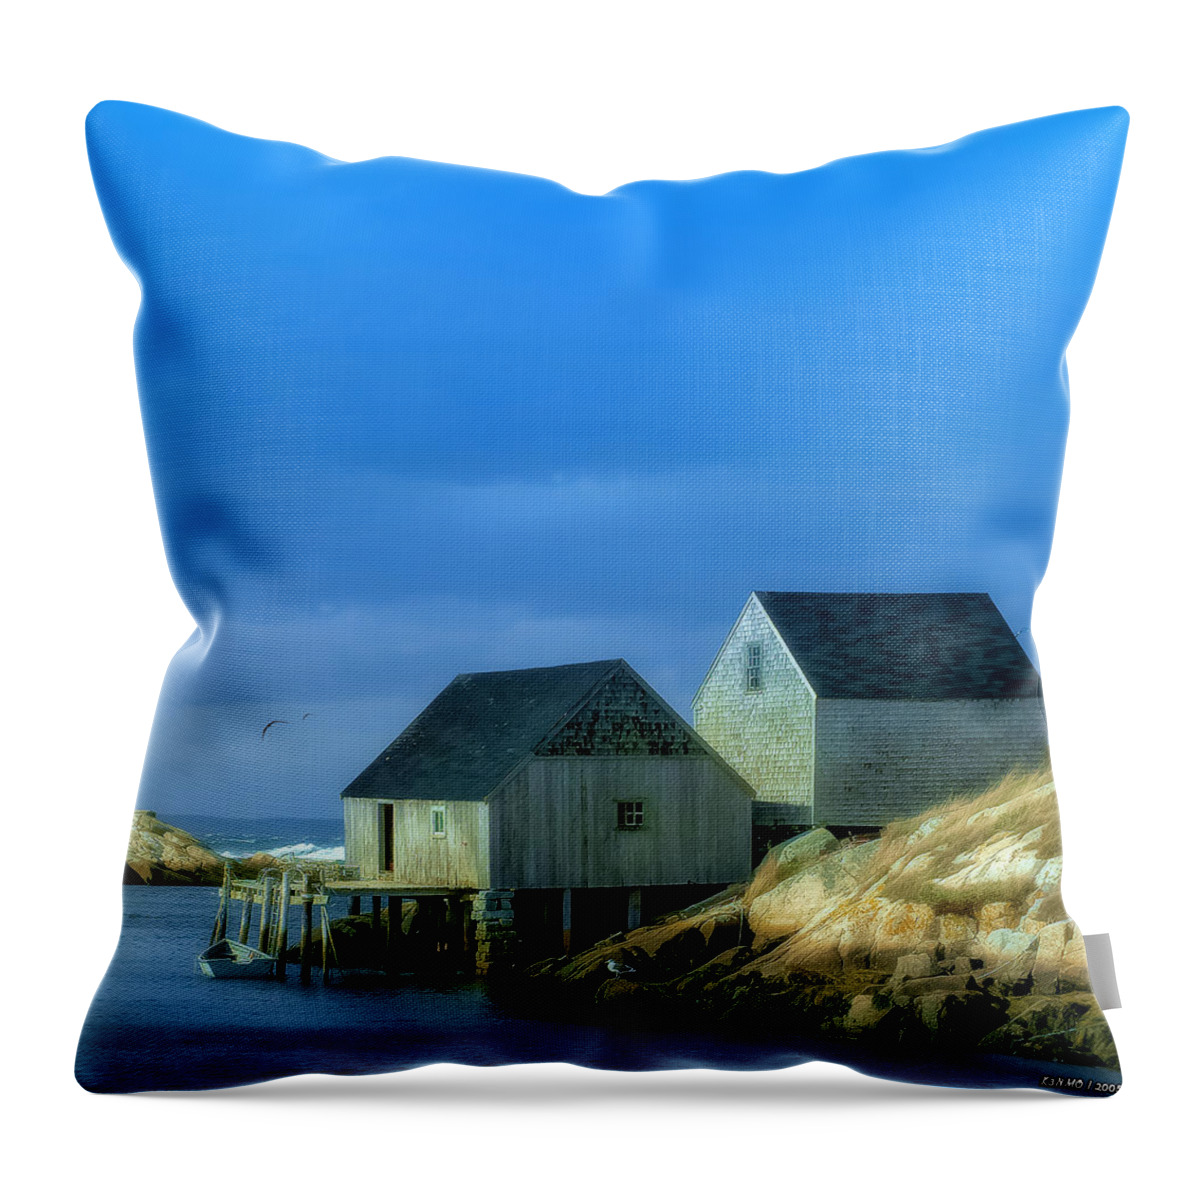 Peggy's Cove Throw Pillow featuring the photograph Peggy's Cove Fishing Shacks by Ken Morris